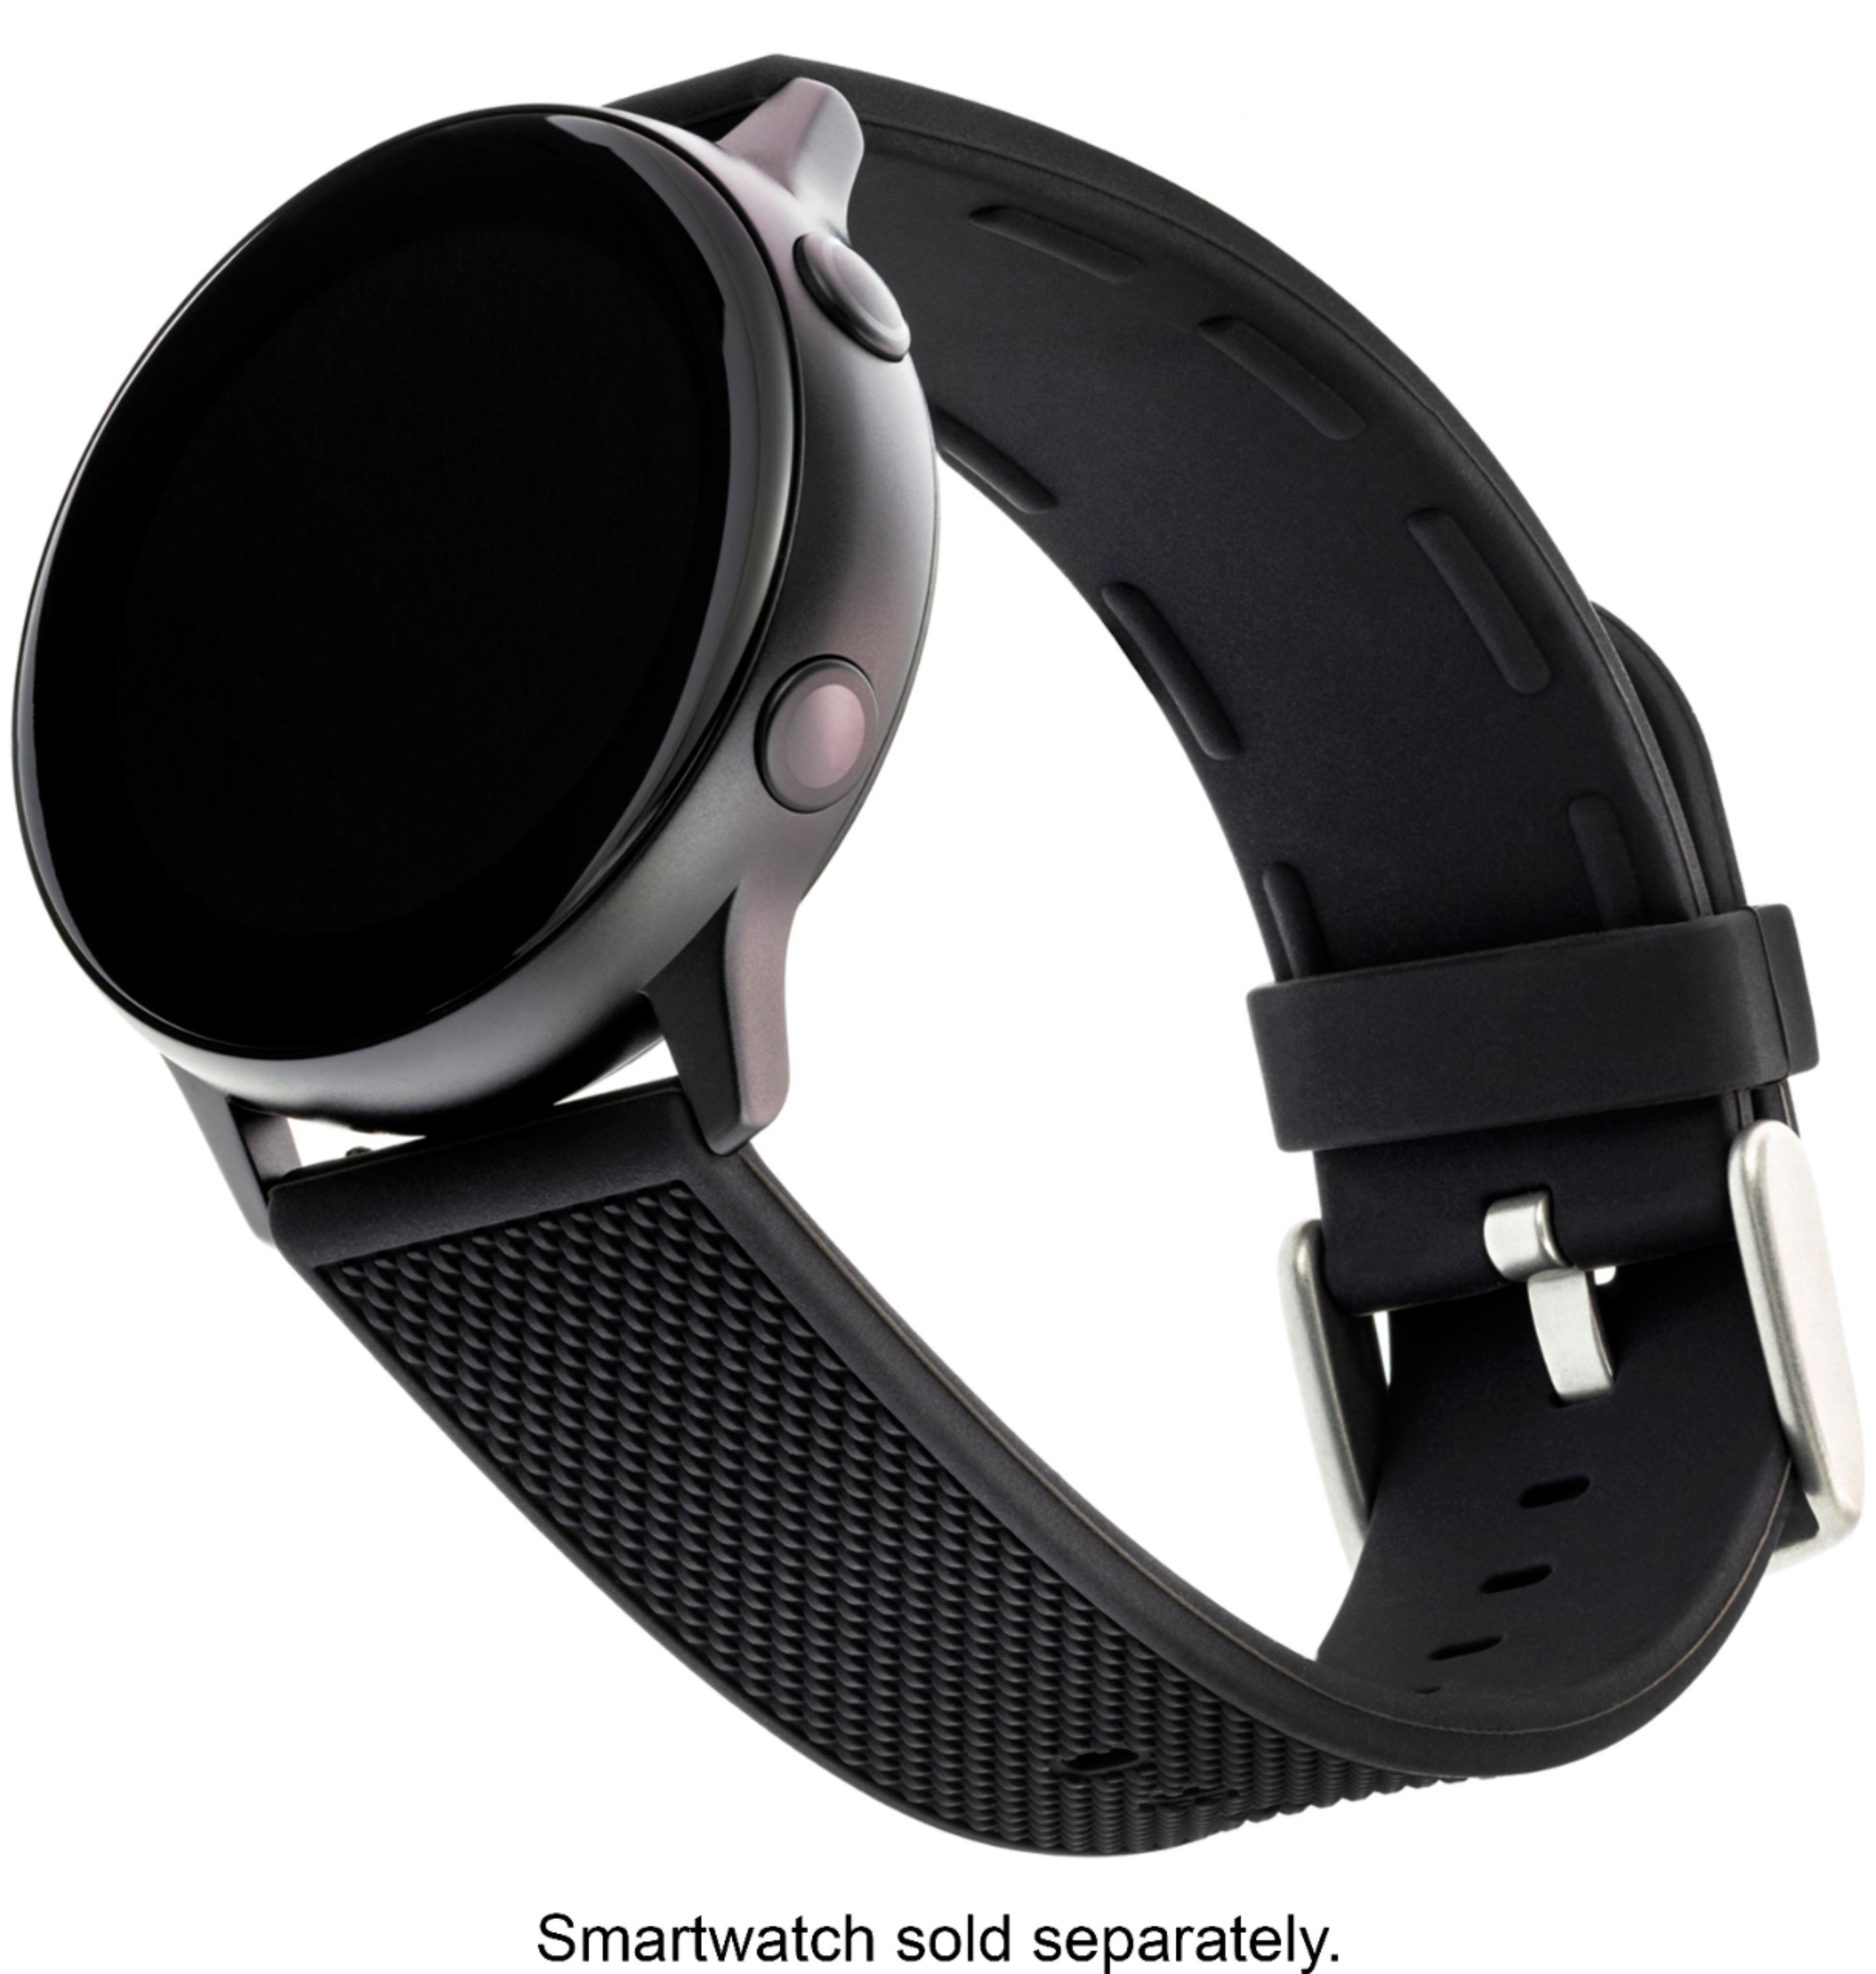 WITHit Band Kit for Samsung Galaxy Watch 46mm, Gear S3, Gear S3 